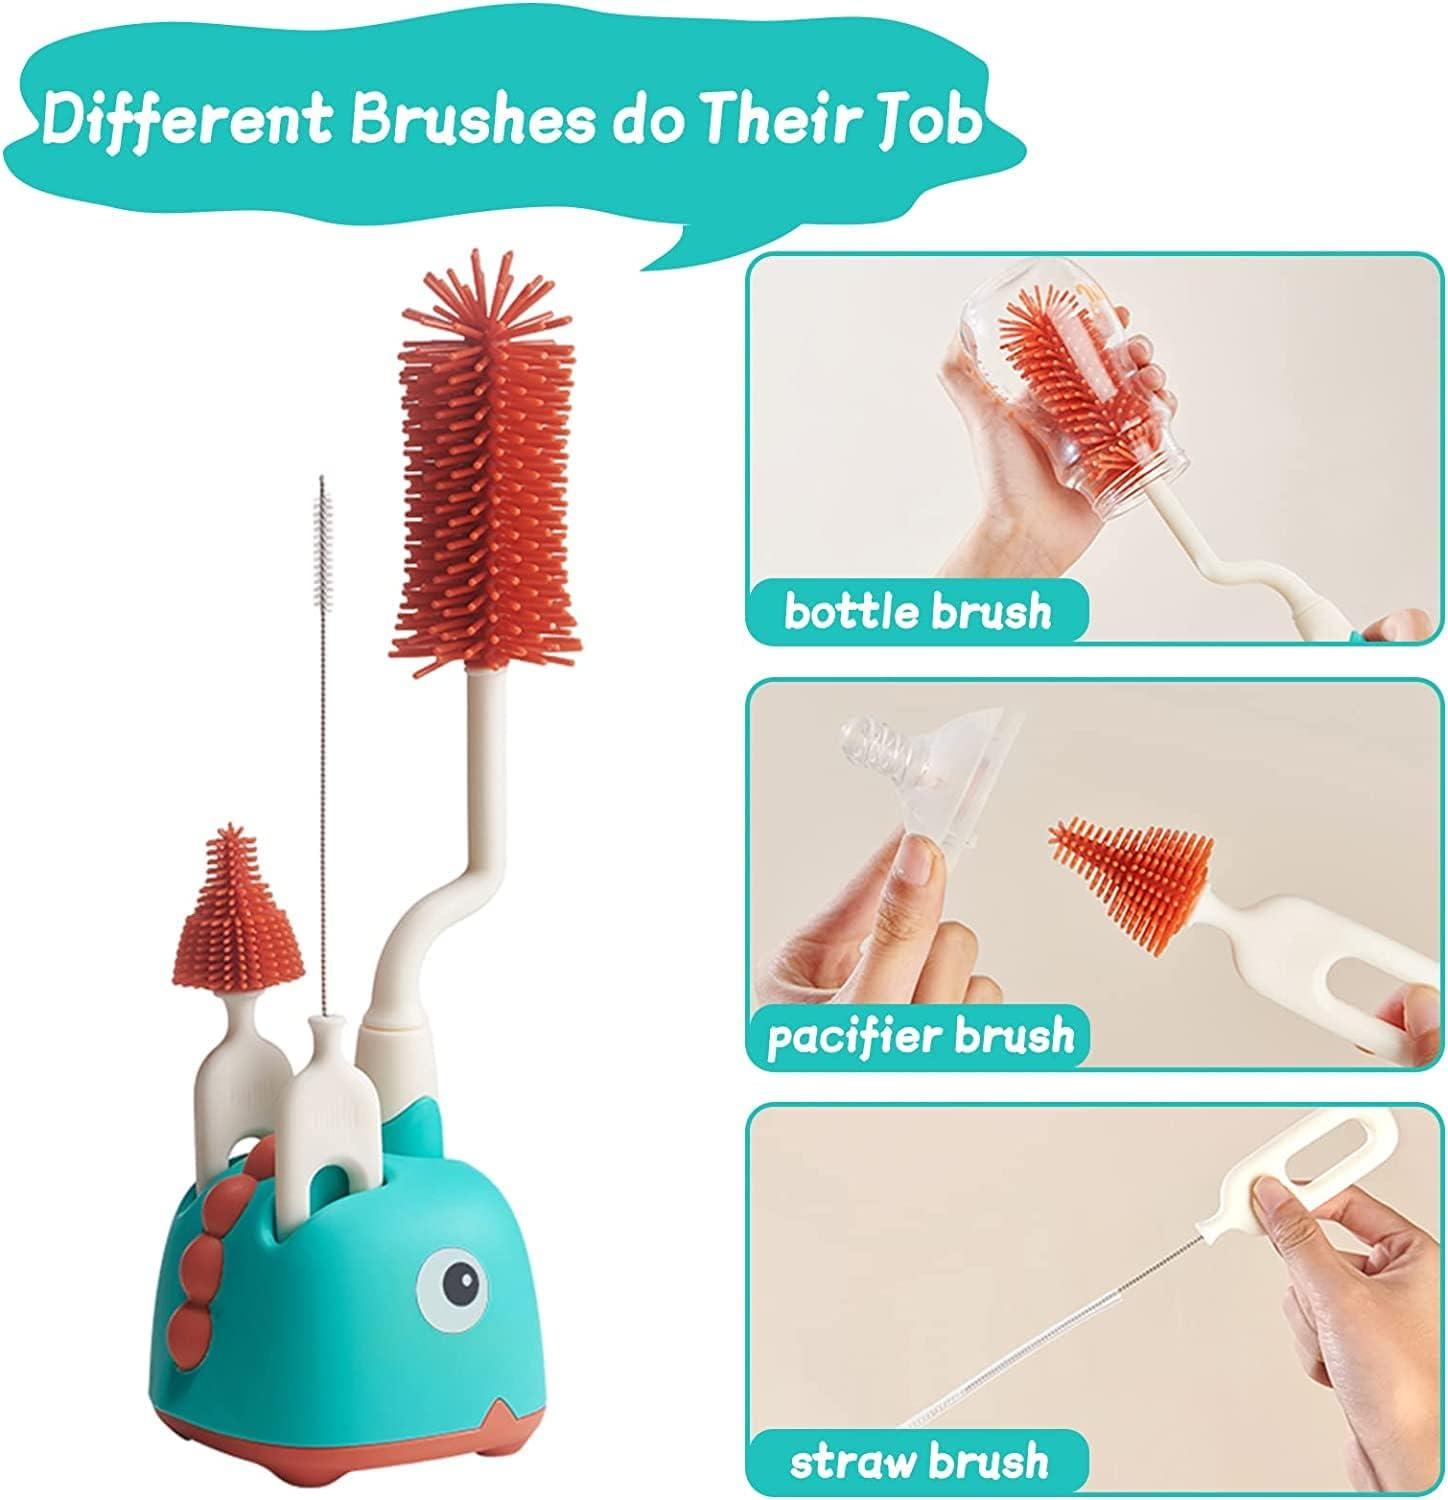 Cubble 3-in-1 Bottle and Nipple Brush Set